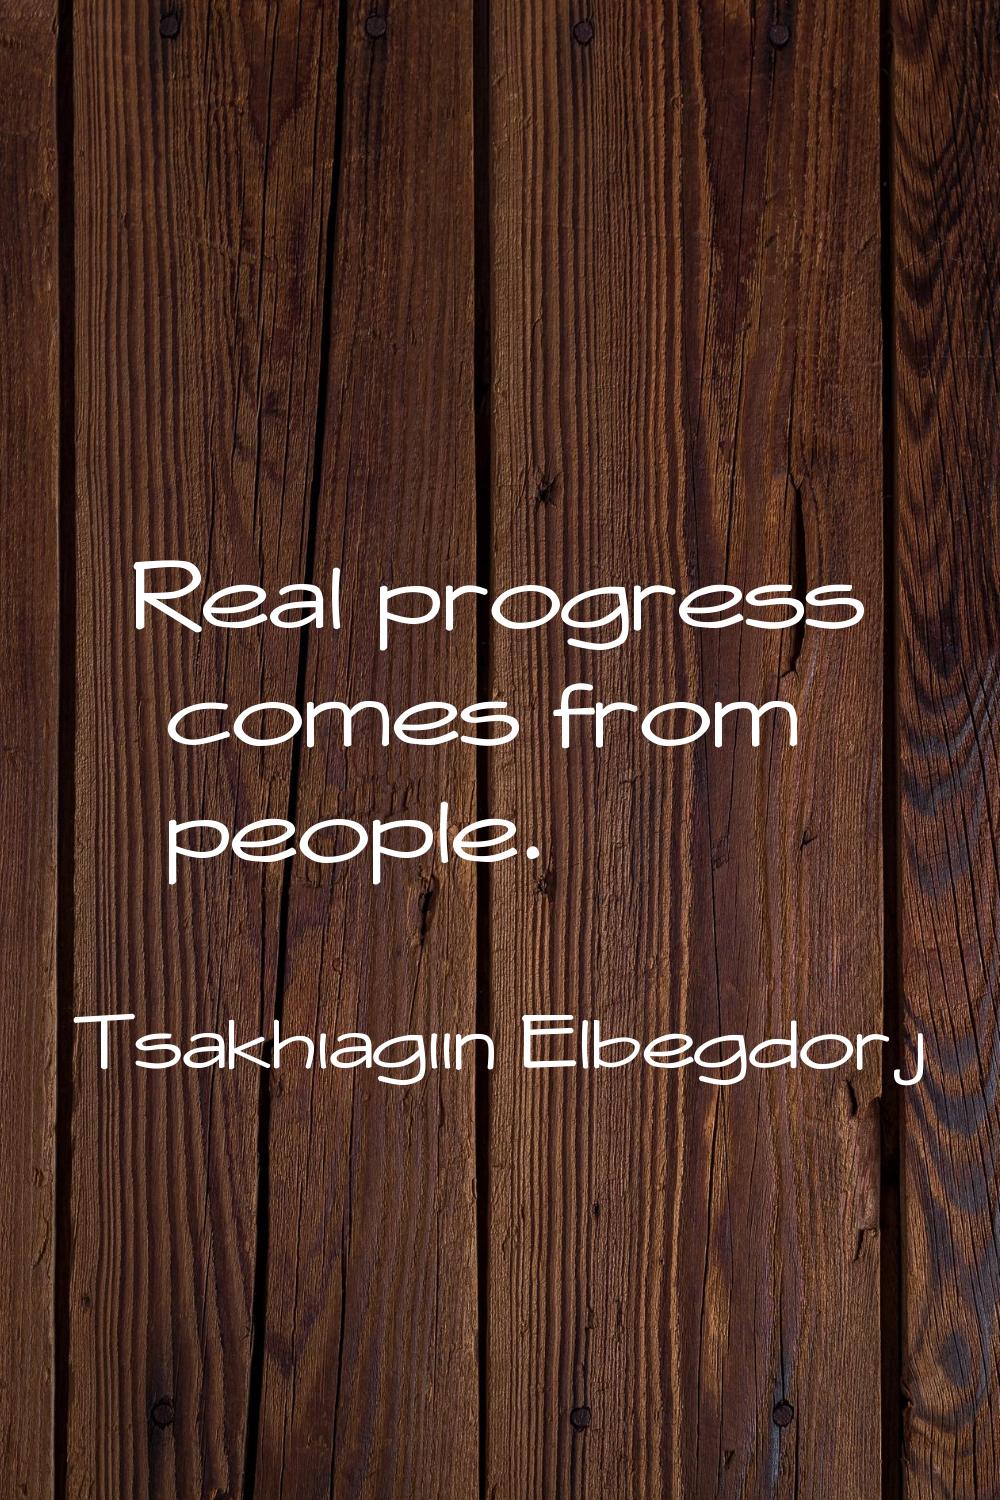 Real progress comes from people.